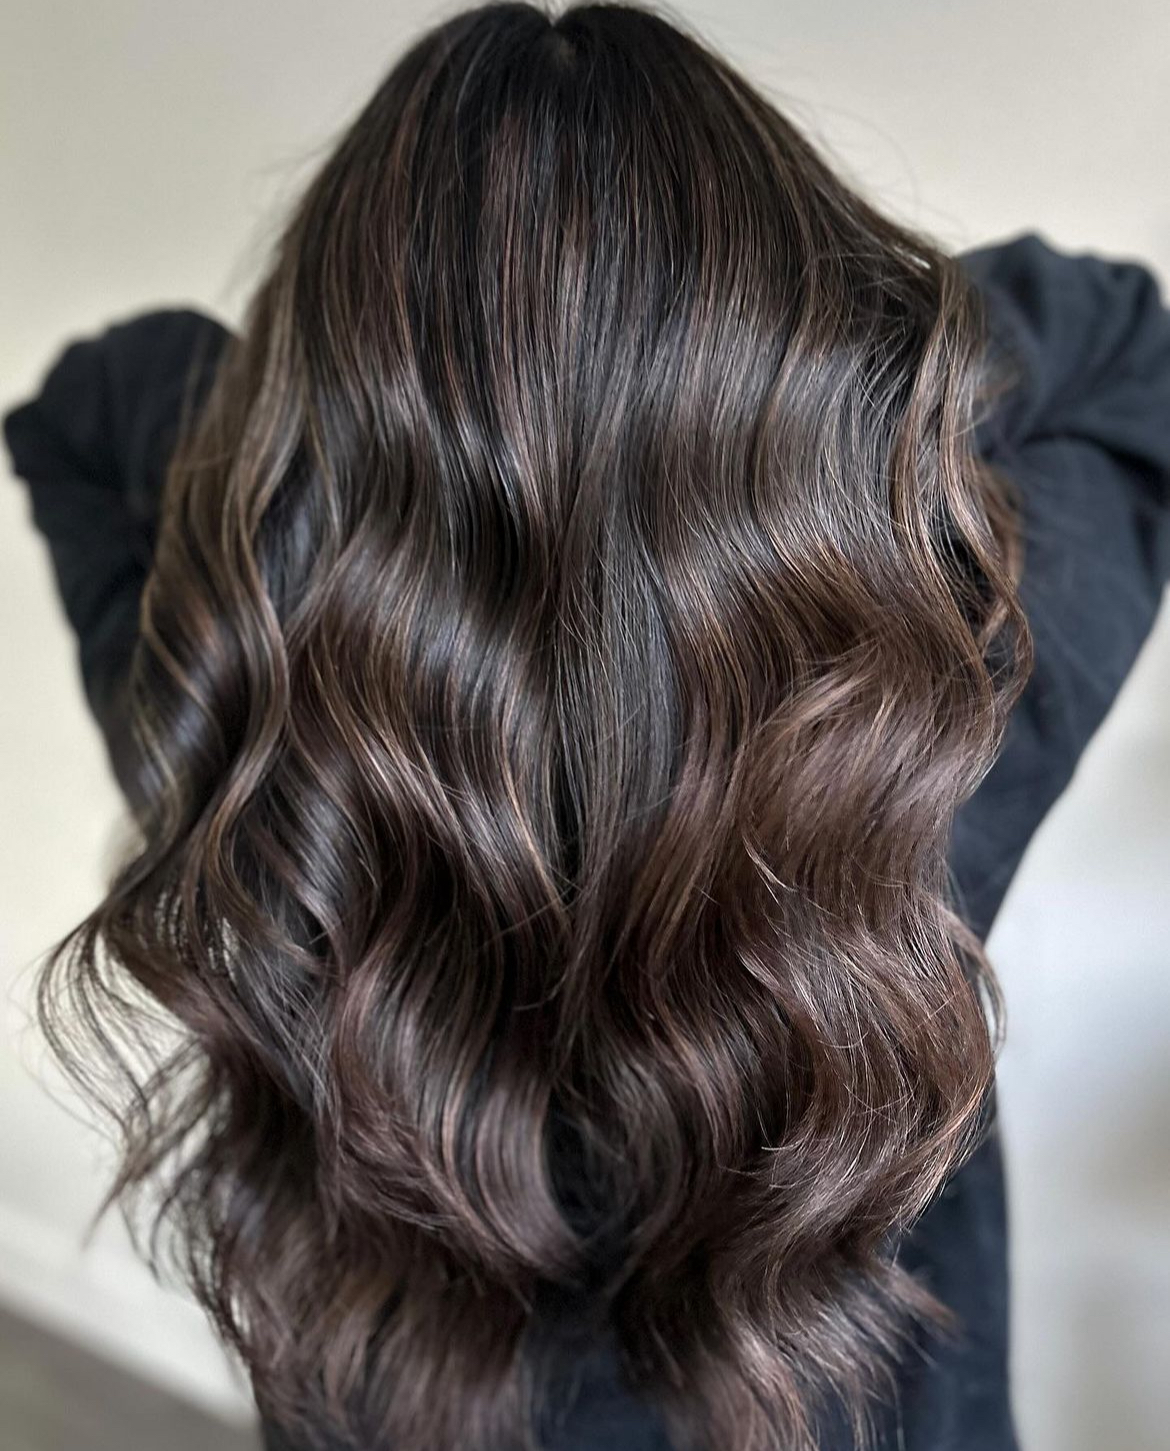 Brown hair color with highlights